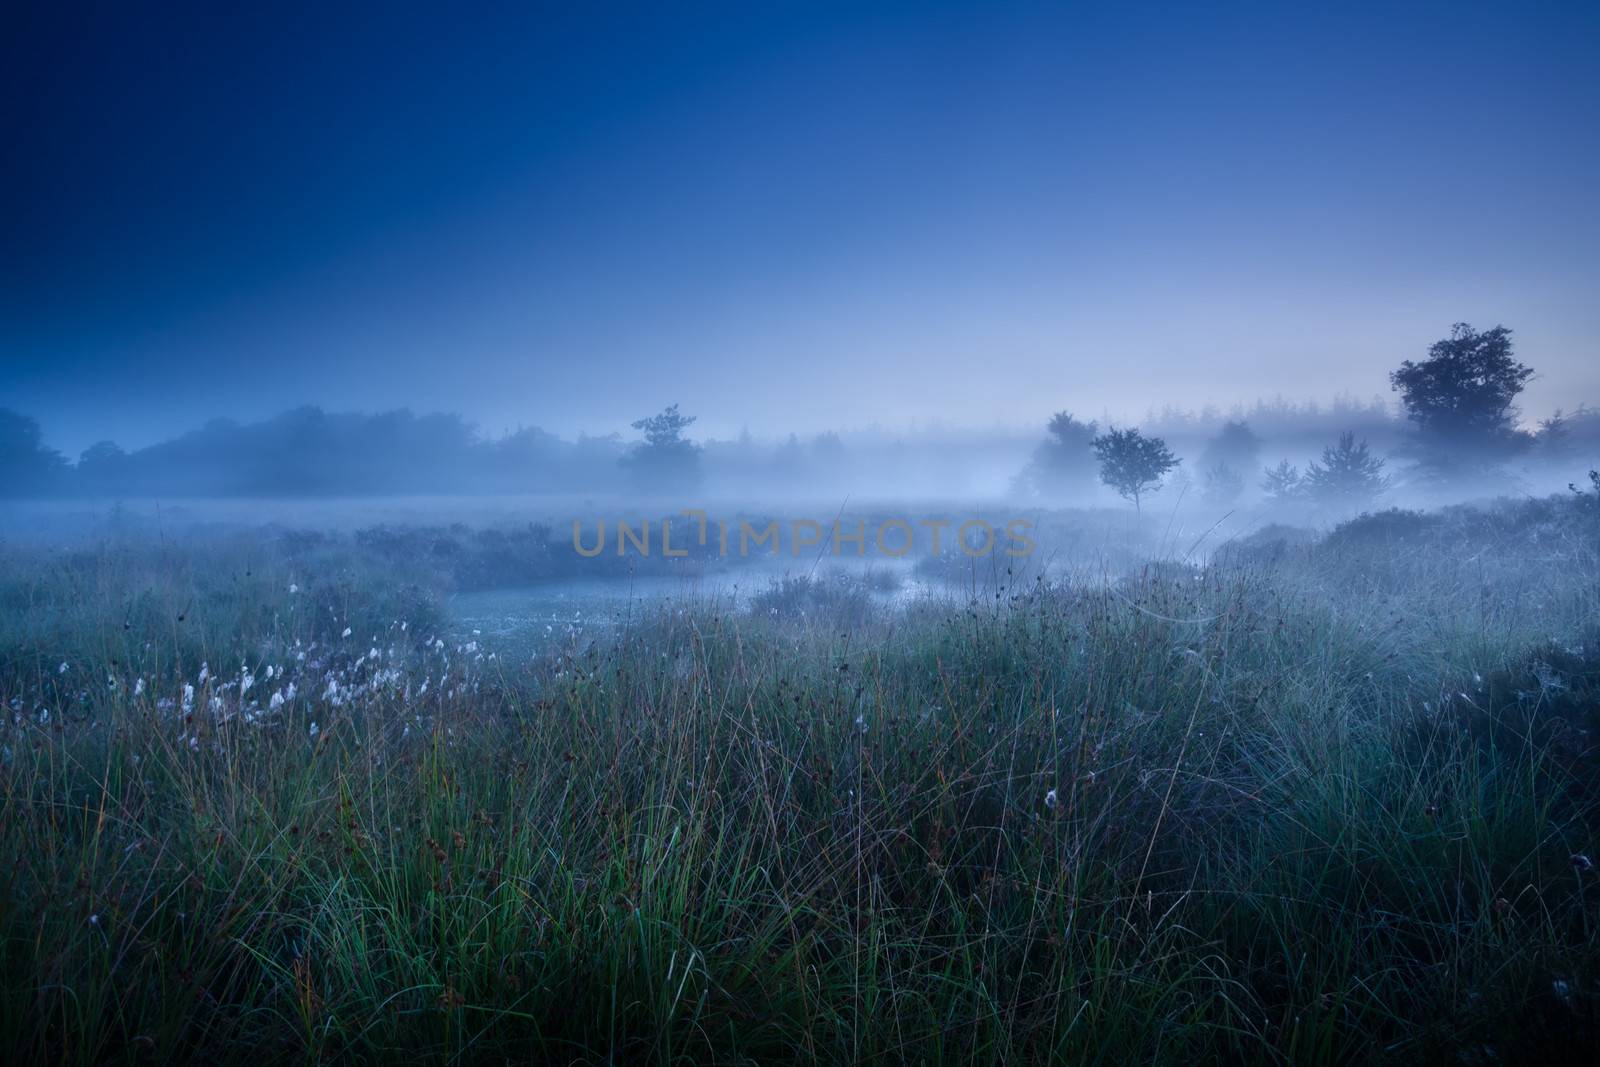 misty morning dusk over swamp by catolla